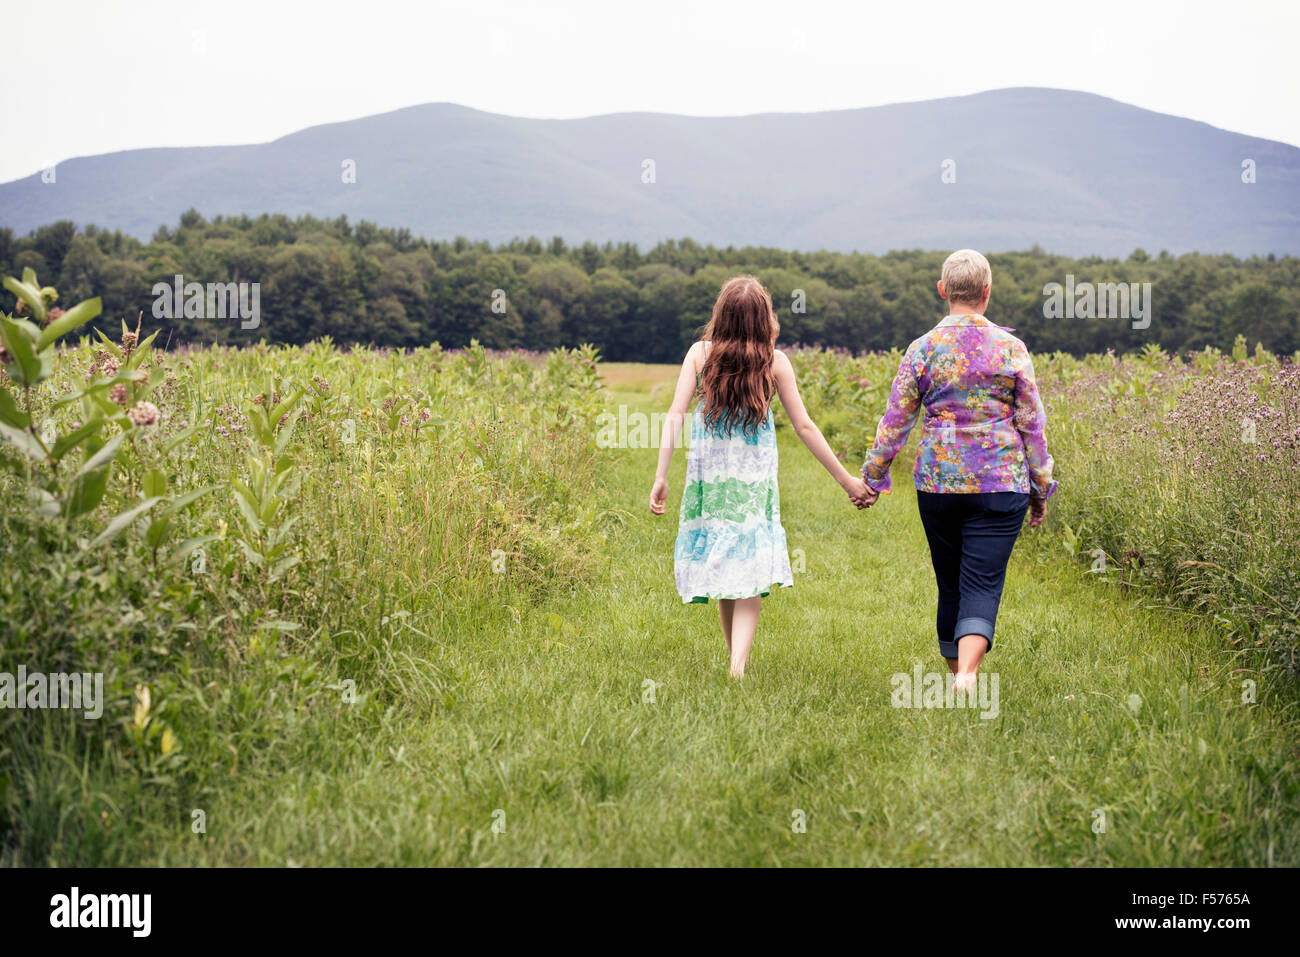 A mature woman and a young girl in a wildflower meadow. Stock Photo